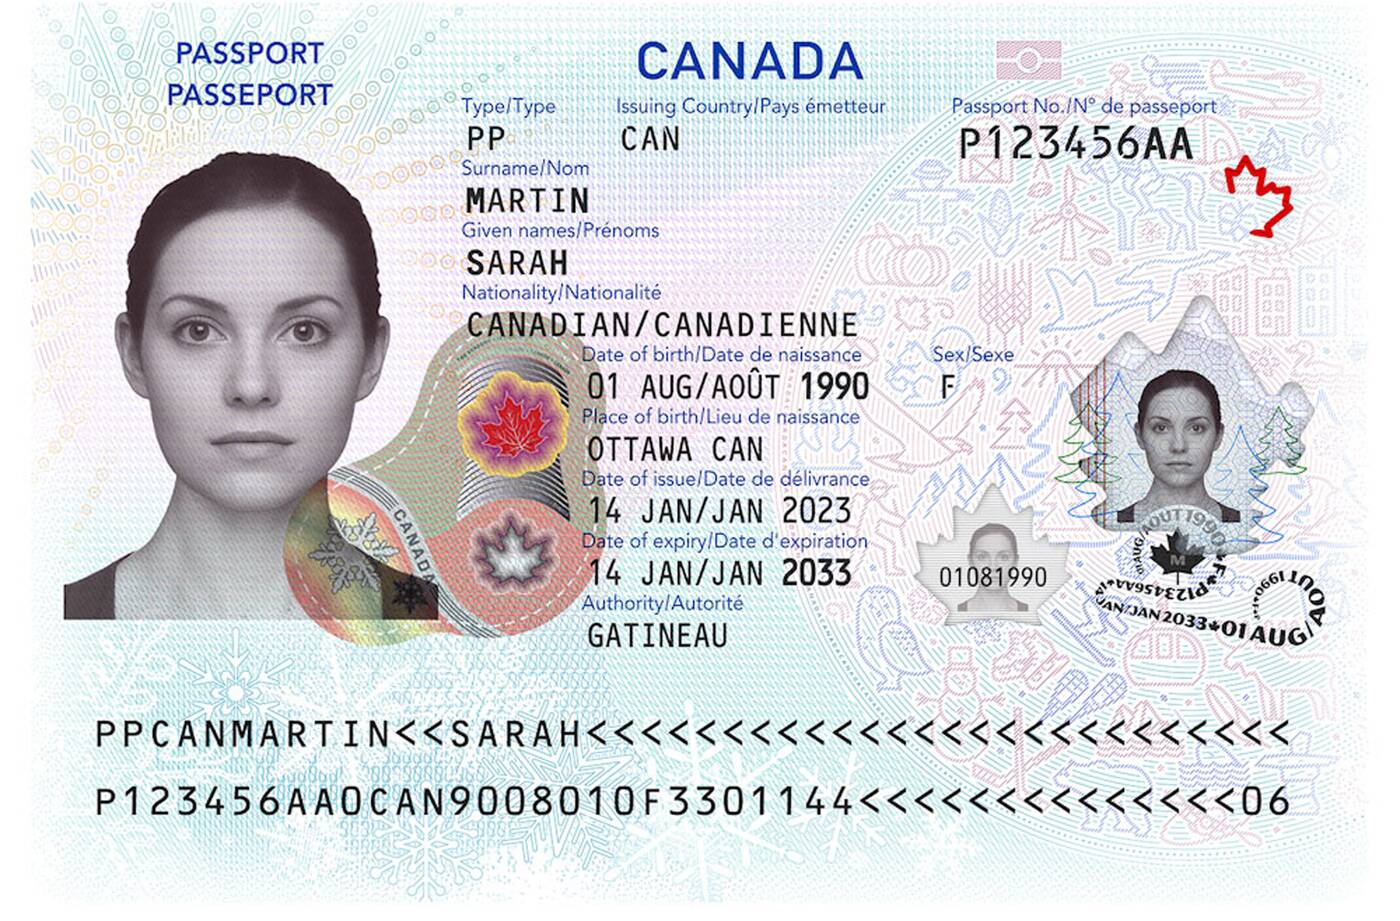 canada-just-unveiled-new-passports-with-several-high-tech-features-canada